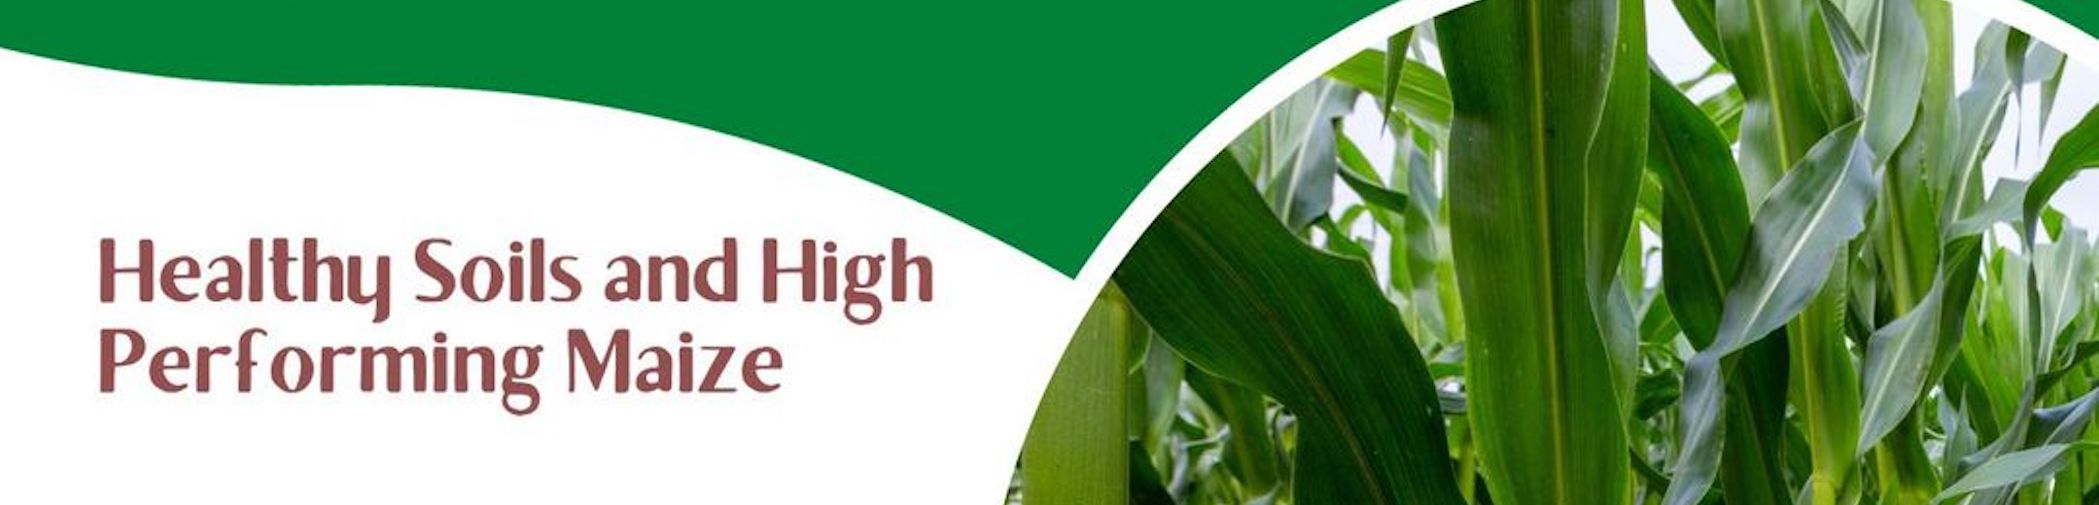 Field day on high-performing maize production at Katunga, northern Victoria, involved AgriSci, Irrigation Farmers Network, GRDC and Victoria Drought Resilience Adoption & Innovation Hub